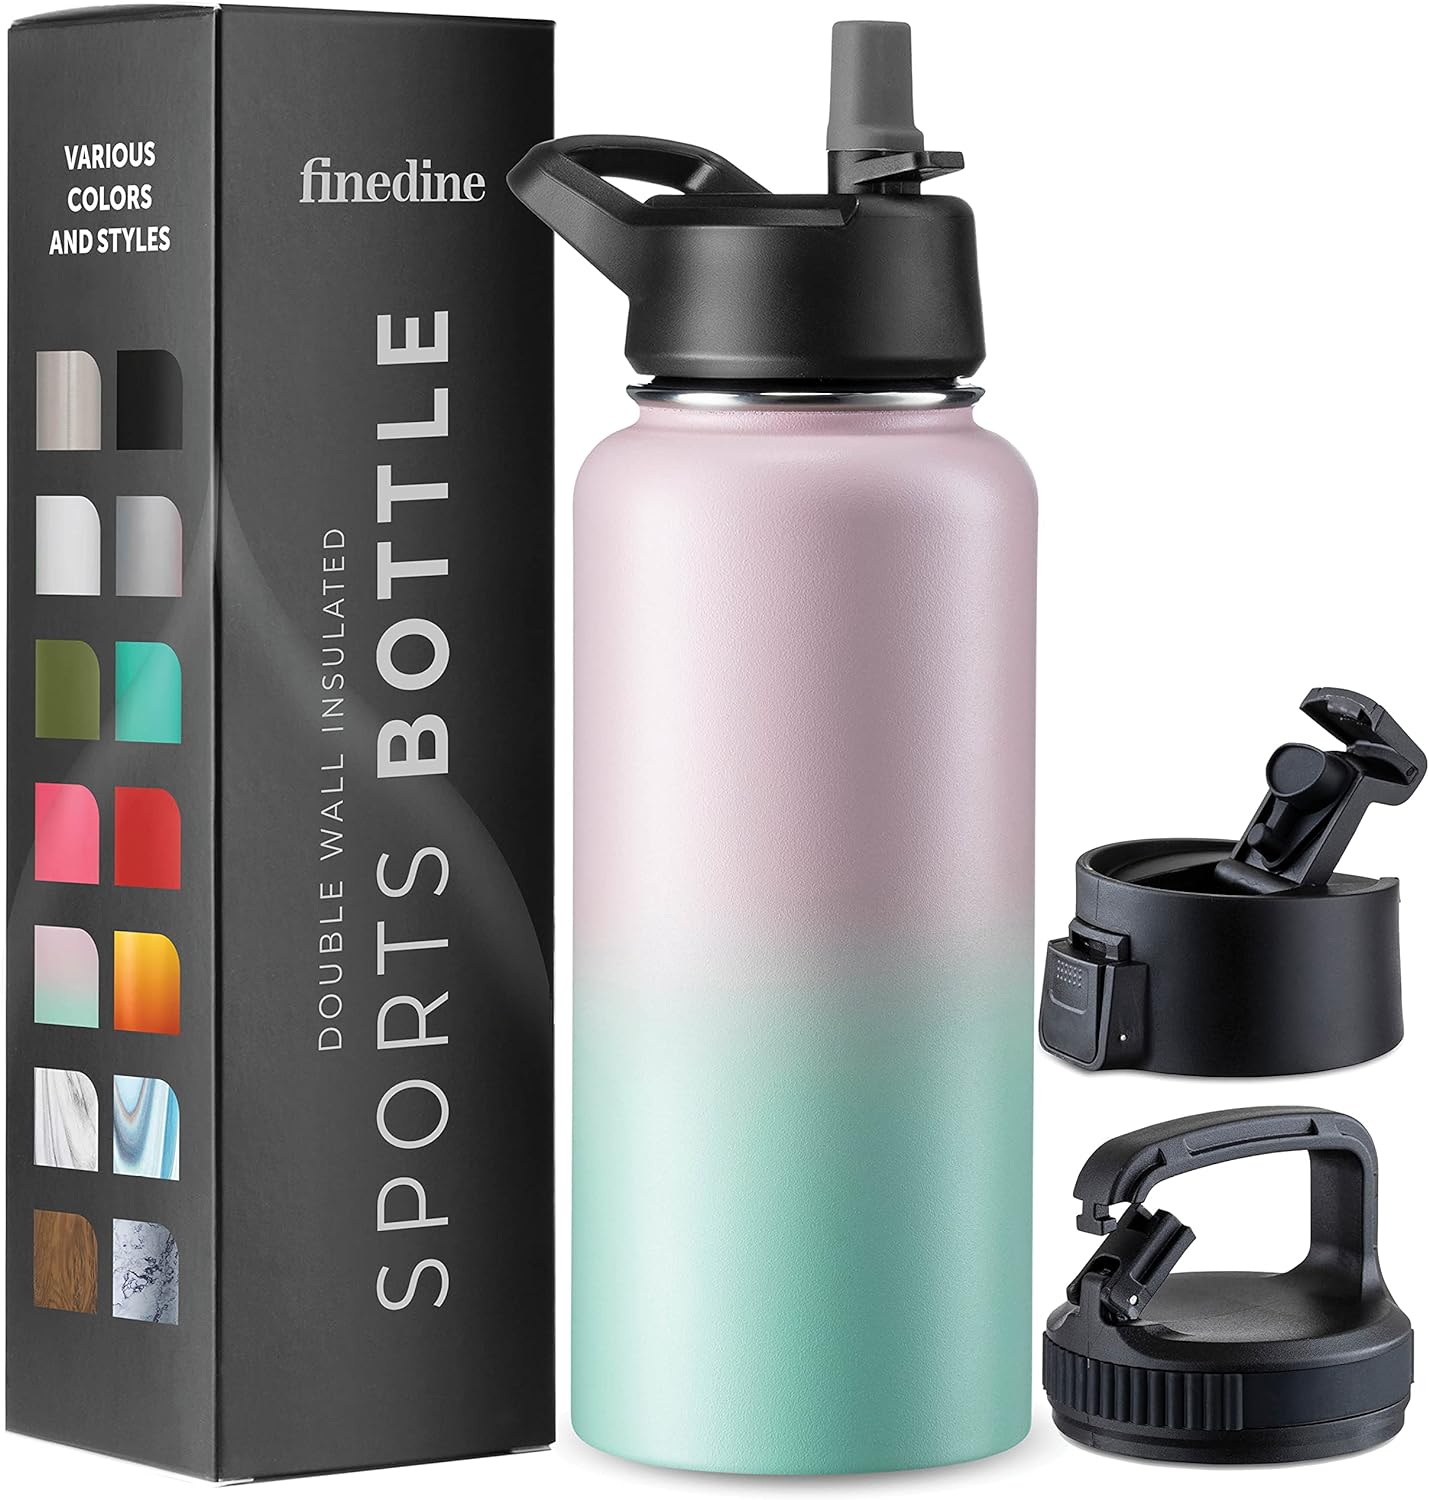 FineDine Insulated Water Bottles with Straw - 32 Oz Stainless Steel Metal Water Bottle W/ 3 Lids - Reusable for Travel, Camping, Bike, Sports - Dreamy Pink-Green